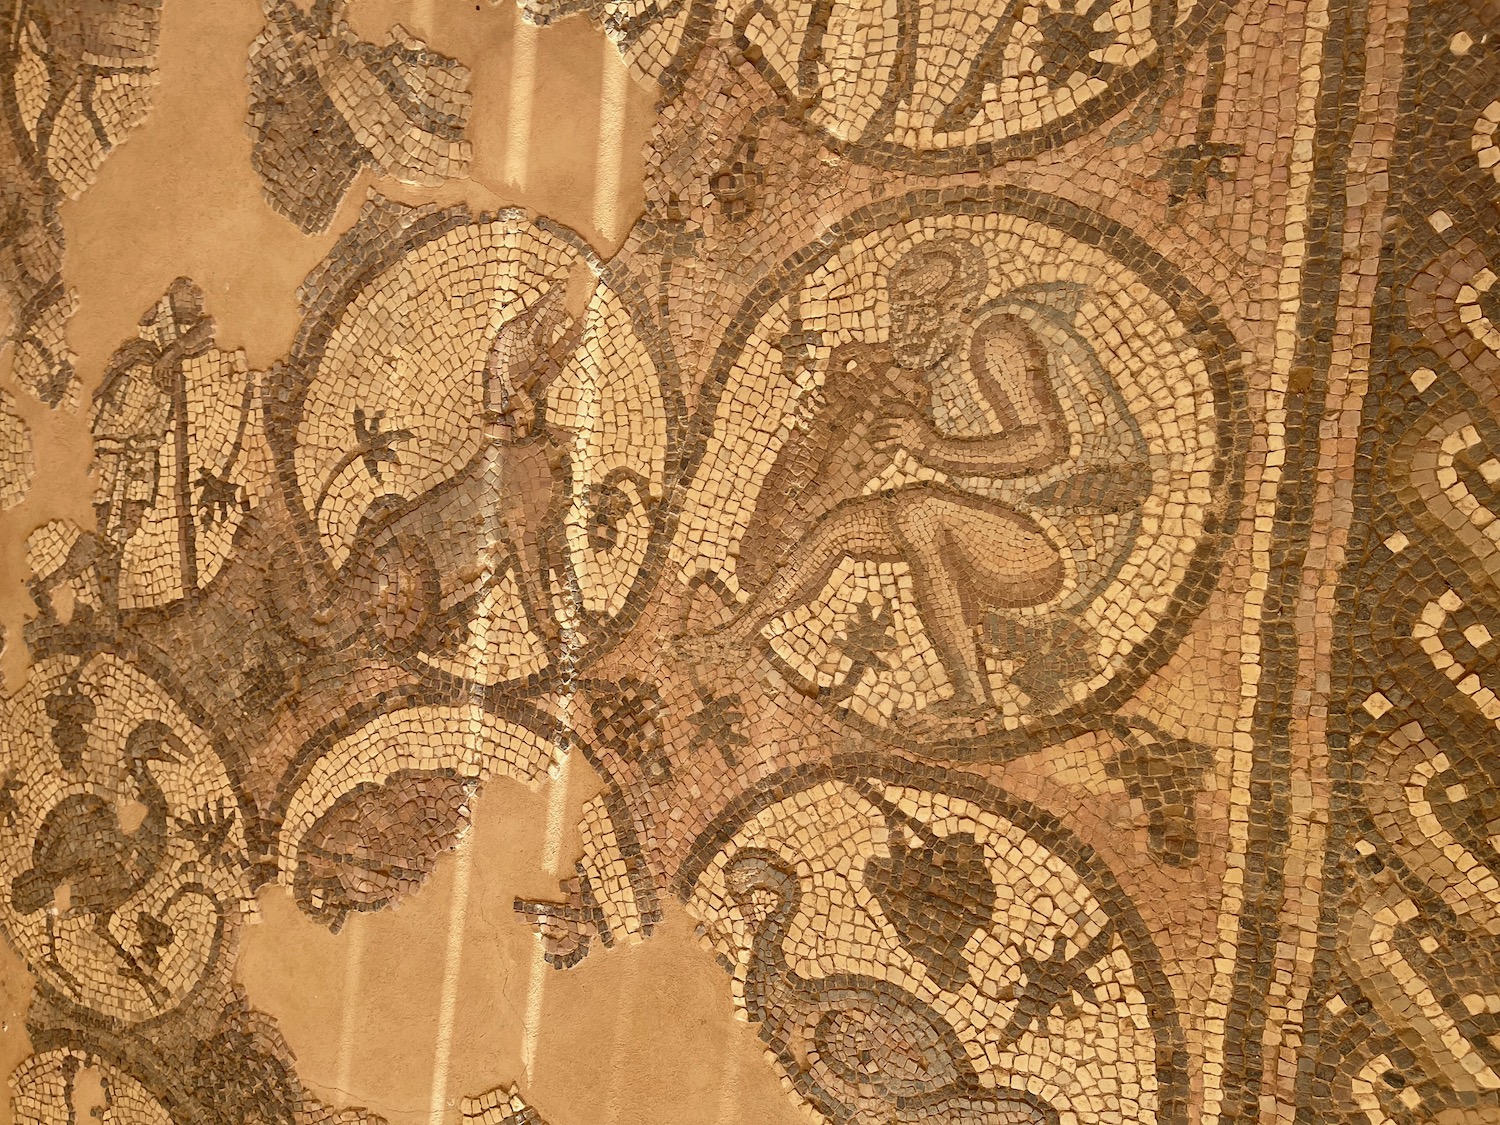 a mosaic of animals and birds